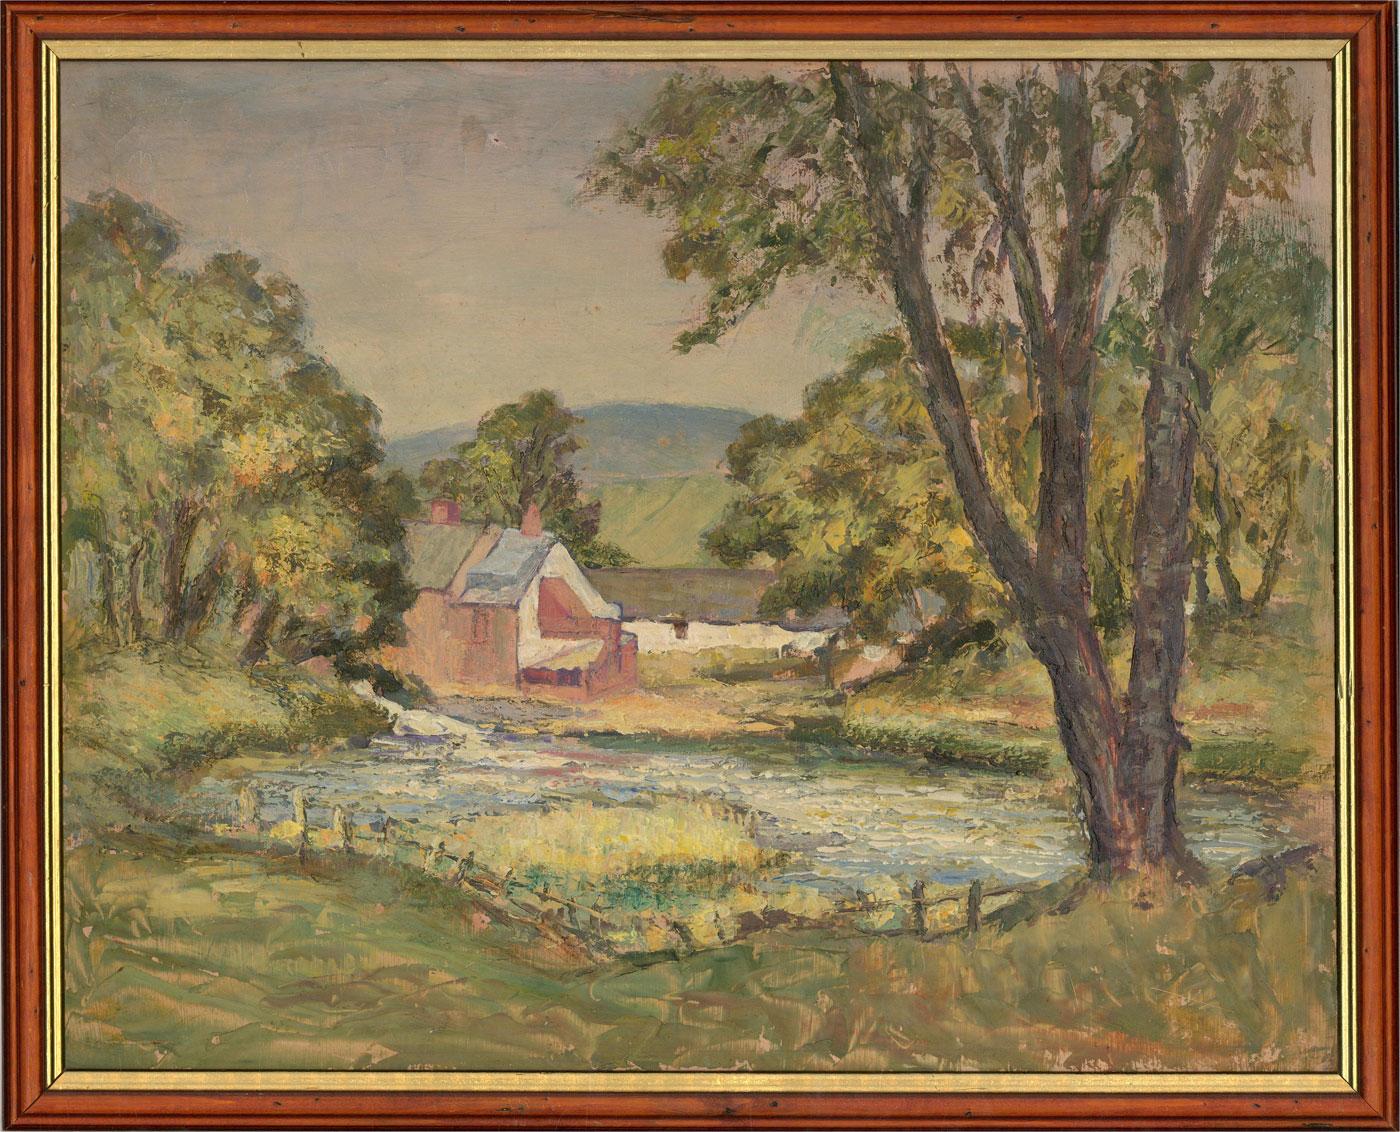 20th Century Oil - Countryside View with Pond - Brown Landscape Painting by Unknown